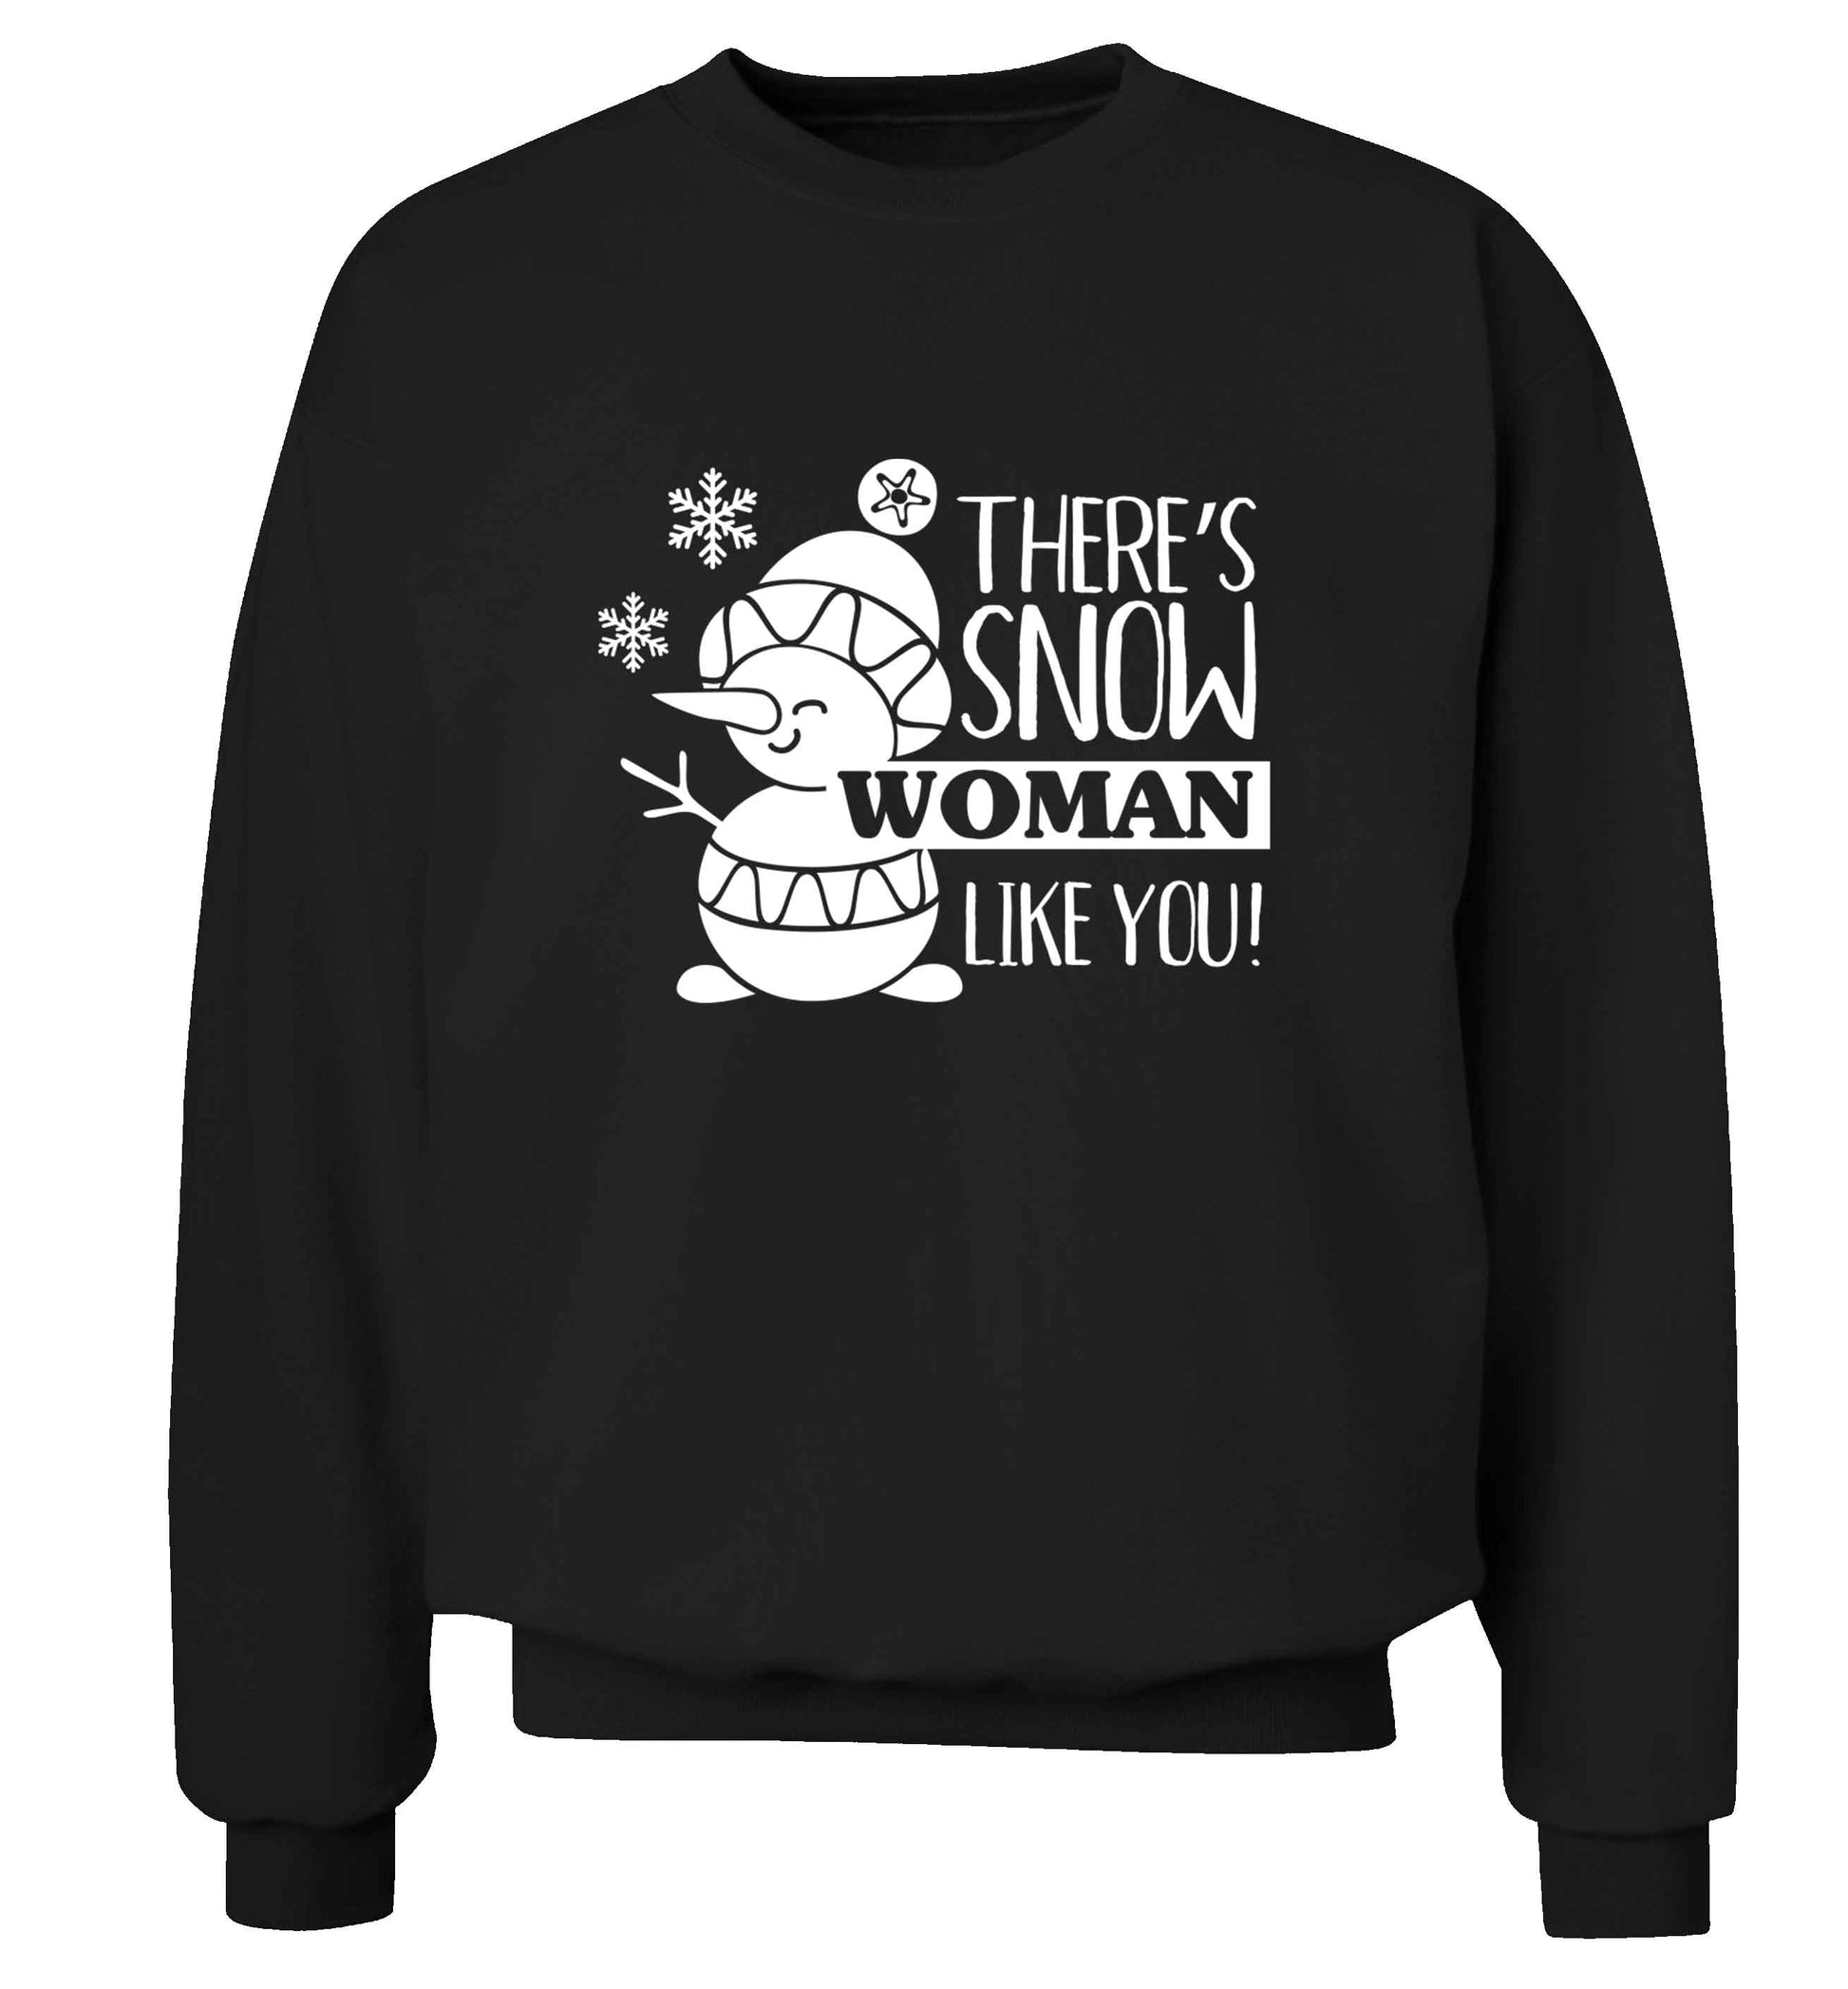 There's snow woman like you adult's unisex black sweater 2XL